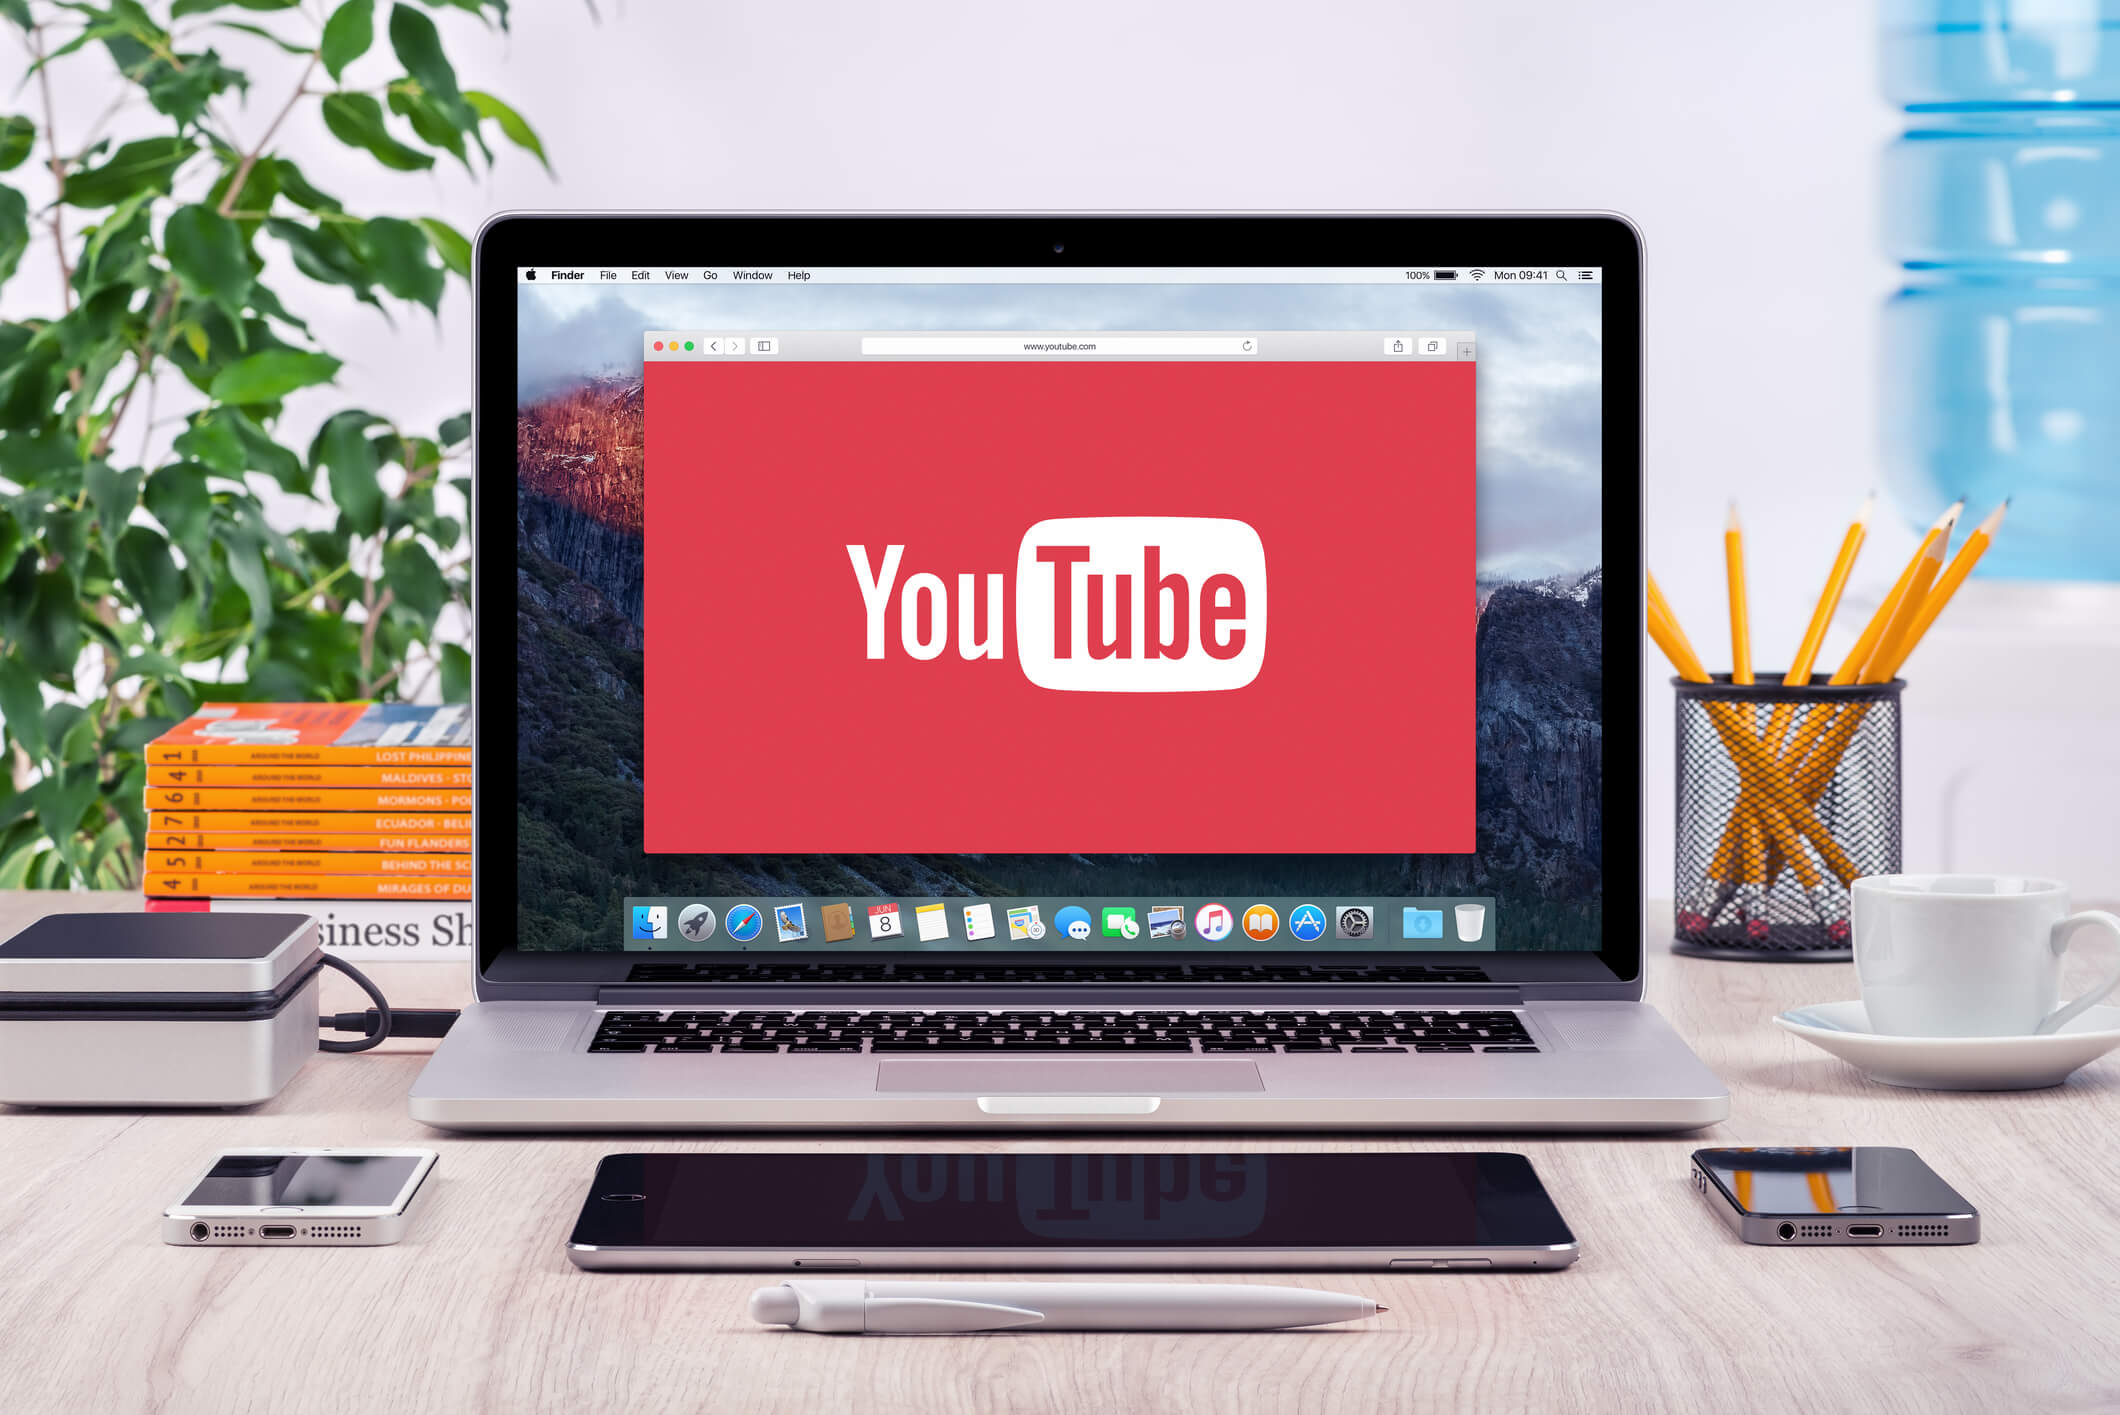 How to Recover Deleted YouTube Videos